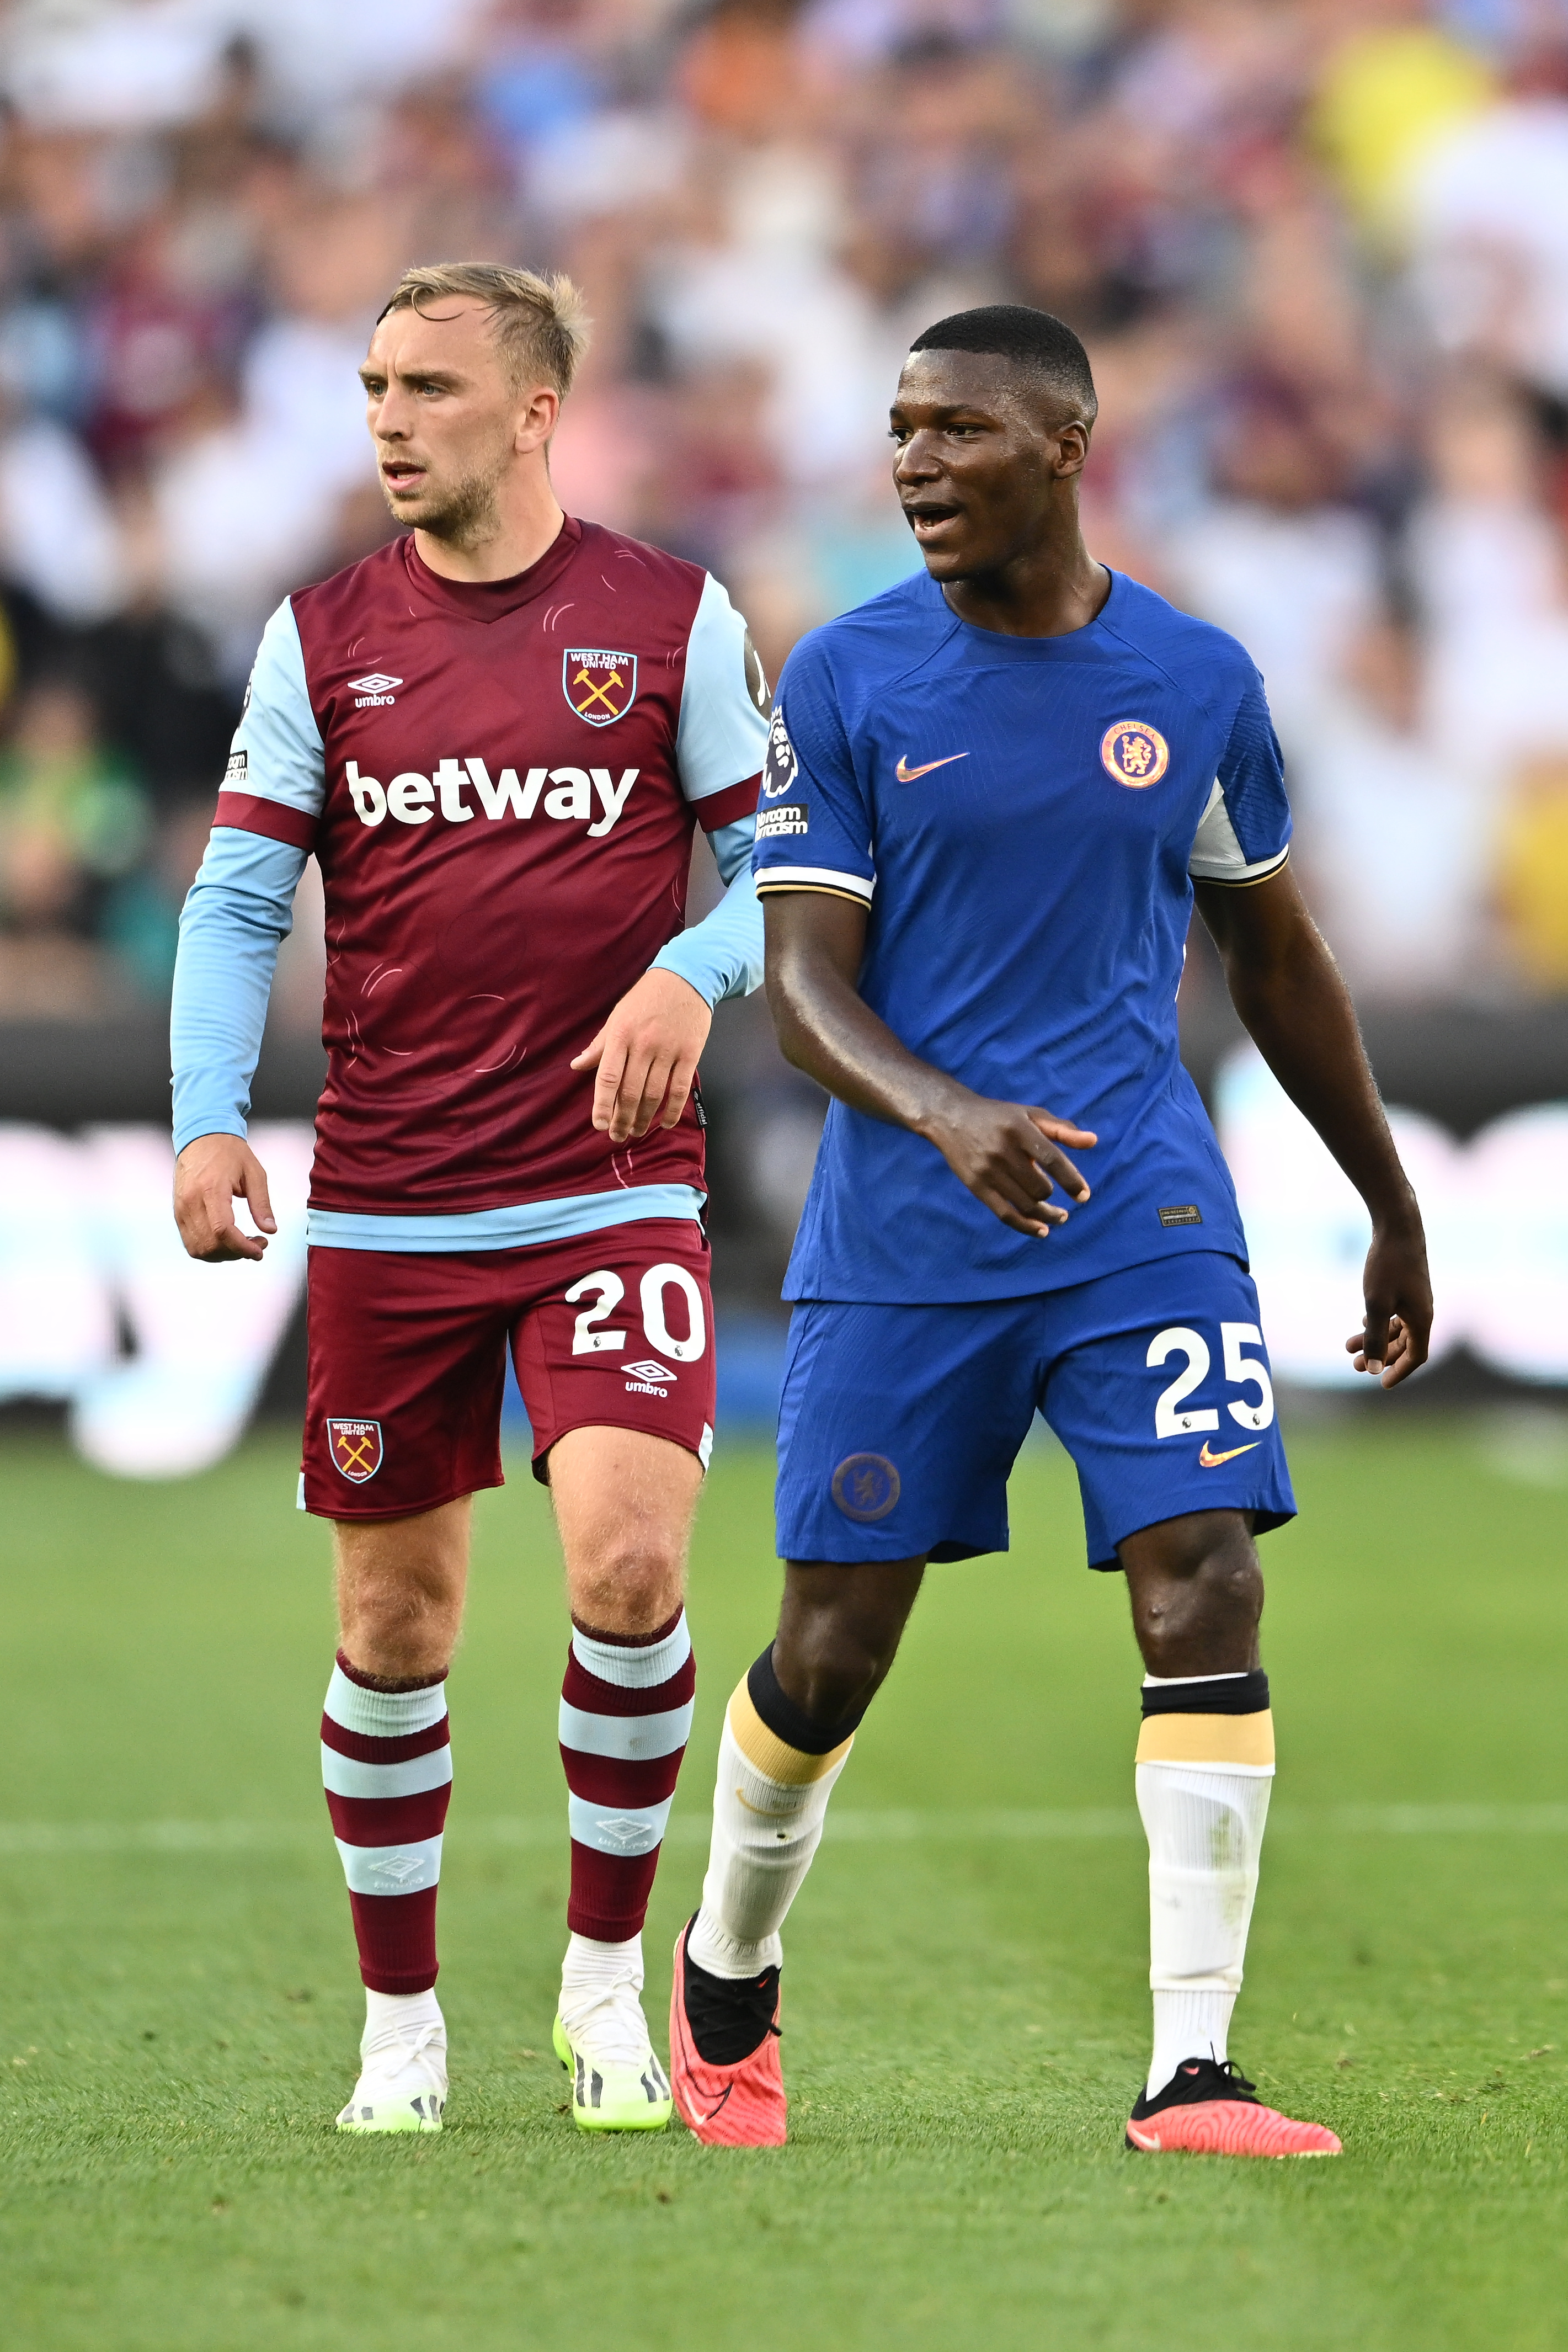 West Ham vs Chelsea: Moisés Caicedo's dream move starts with a nightmare